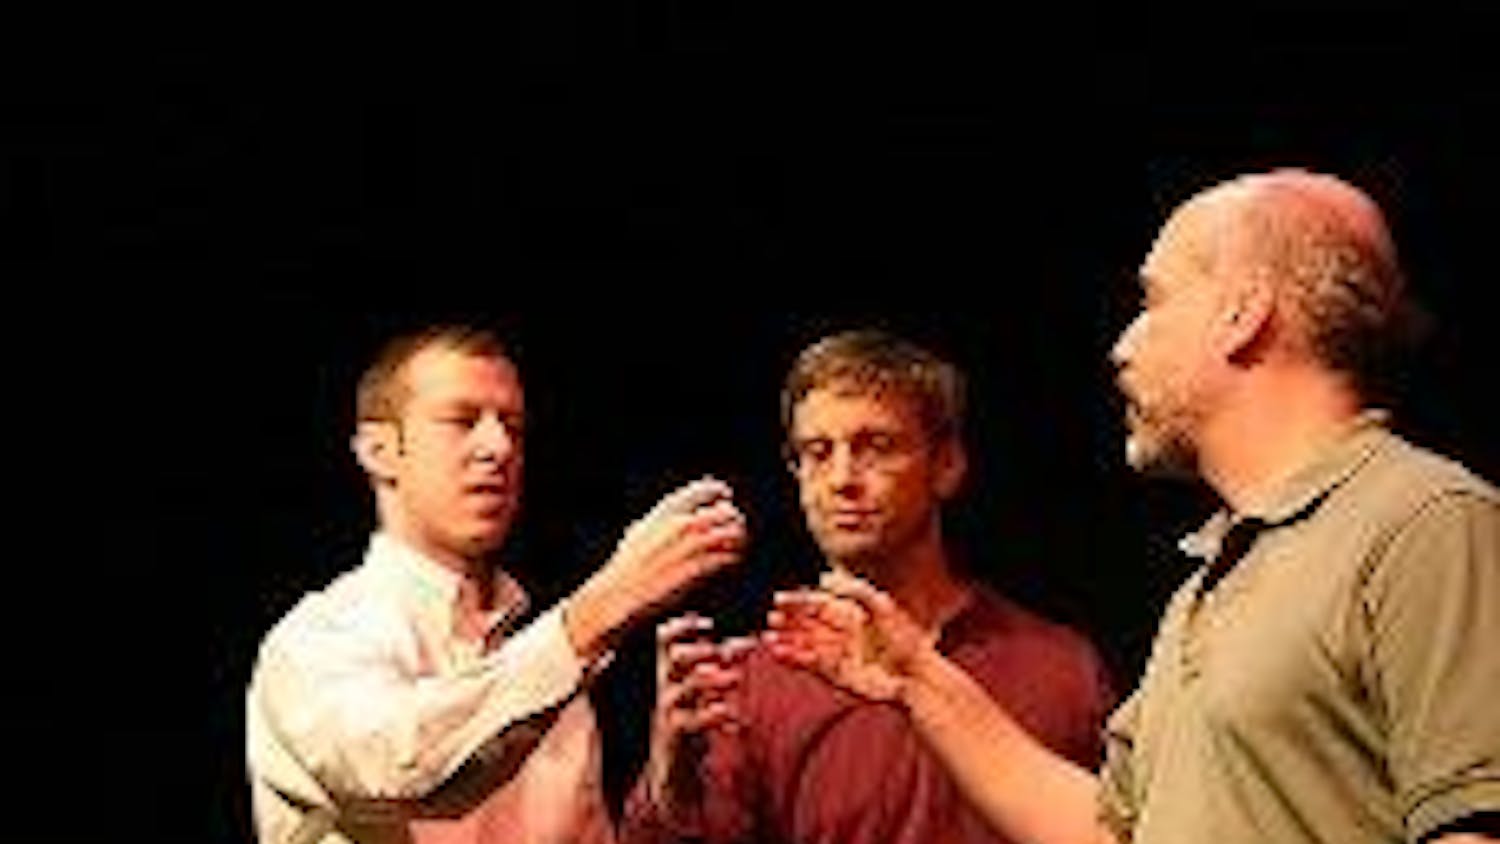 LAUGHING STOCK - Improv actors take cues from the audience to shape unique and hysterical shows. Each performance consequently has the potential to fail or succeed, creating an exciting experience. Come to the theater twice to see the full range of the ac